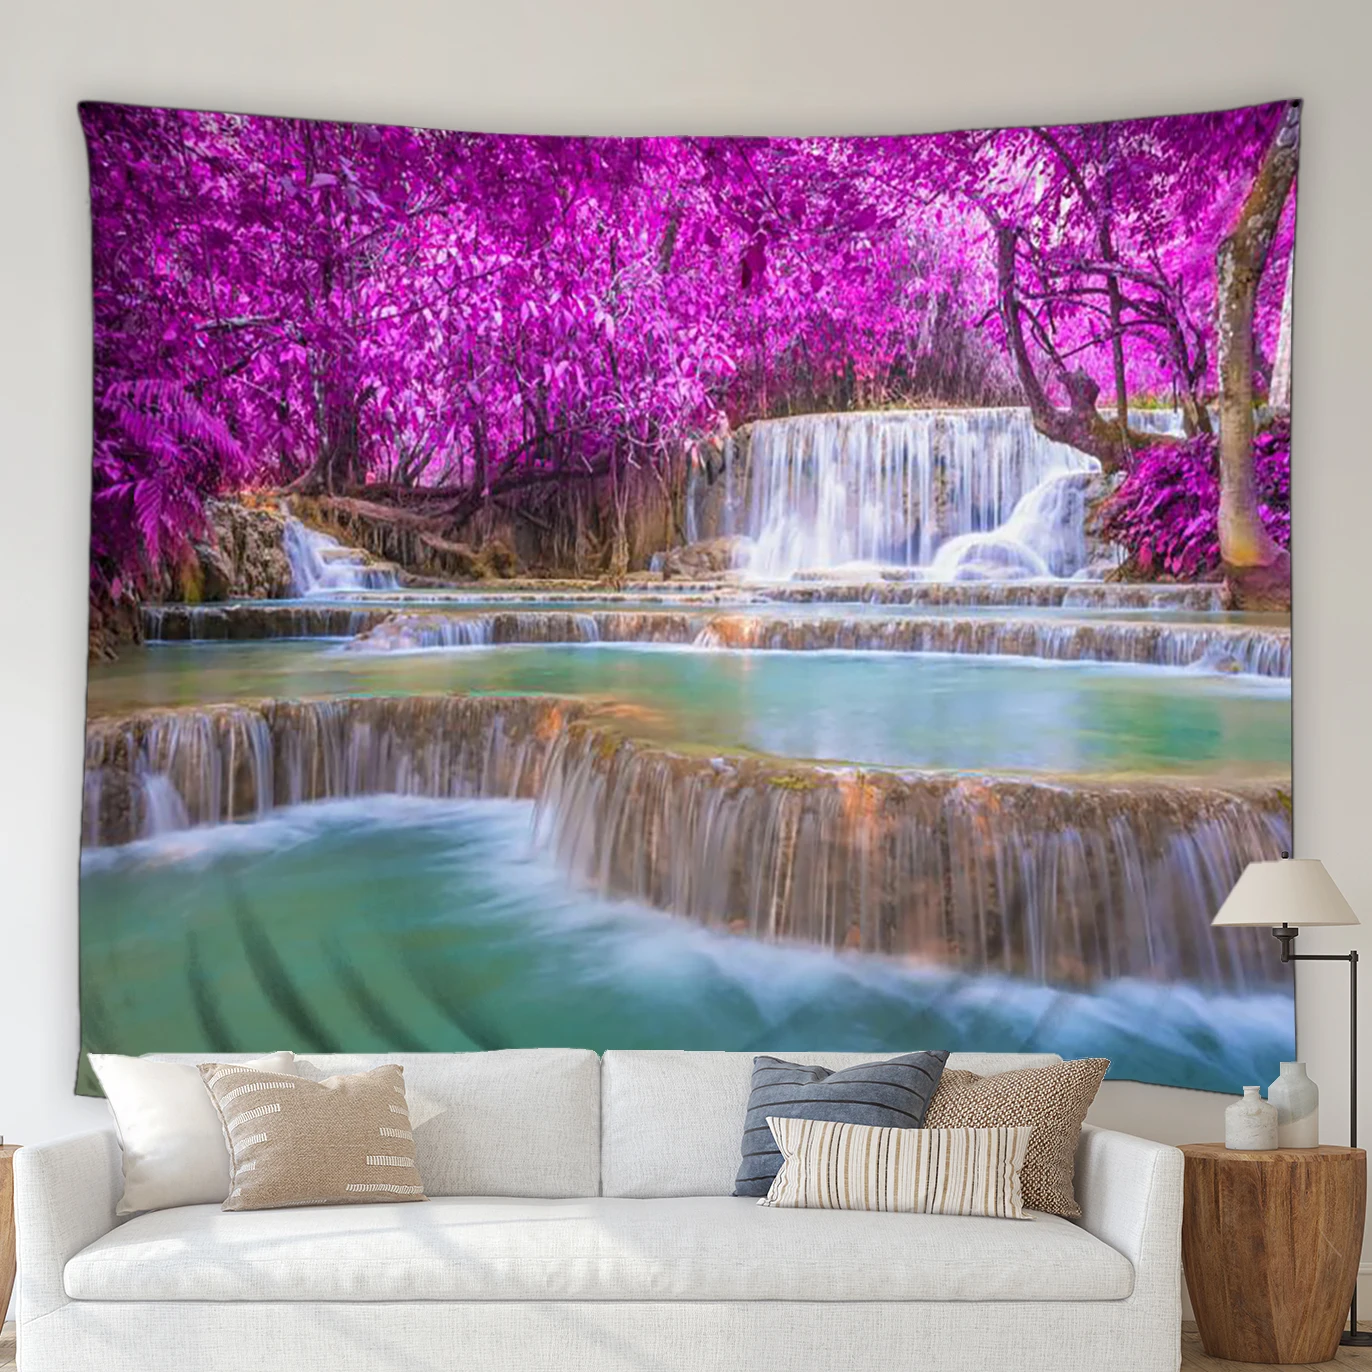 

3D Waterfall Landscape Tapestry Green Forest Trees Plants Stones Beautiful Natural Scenery Bedroom Wall Hanging Blanket Decor